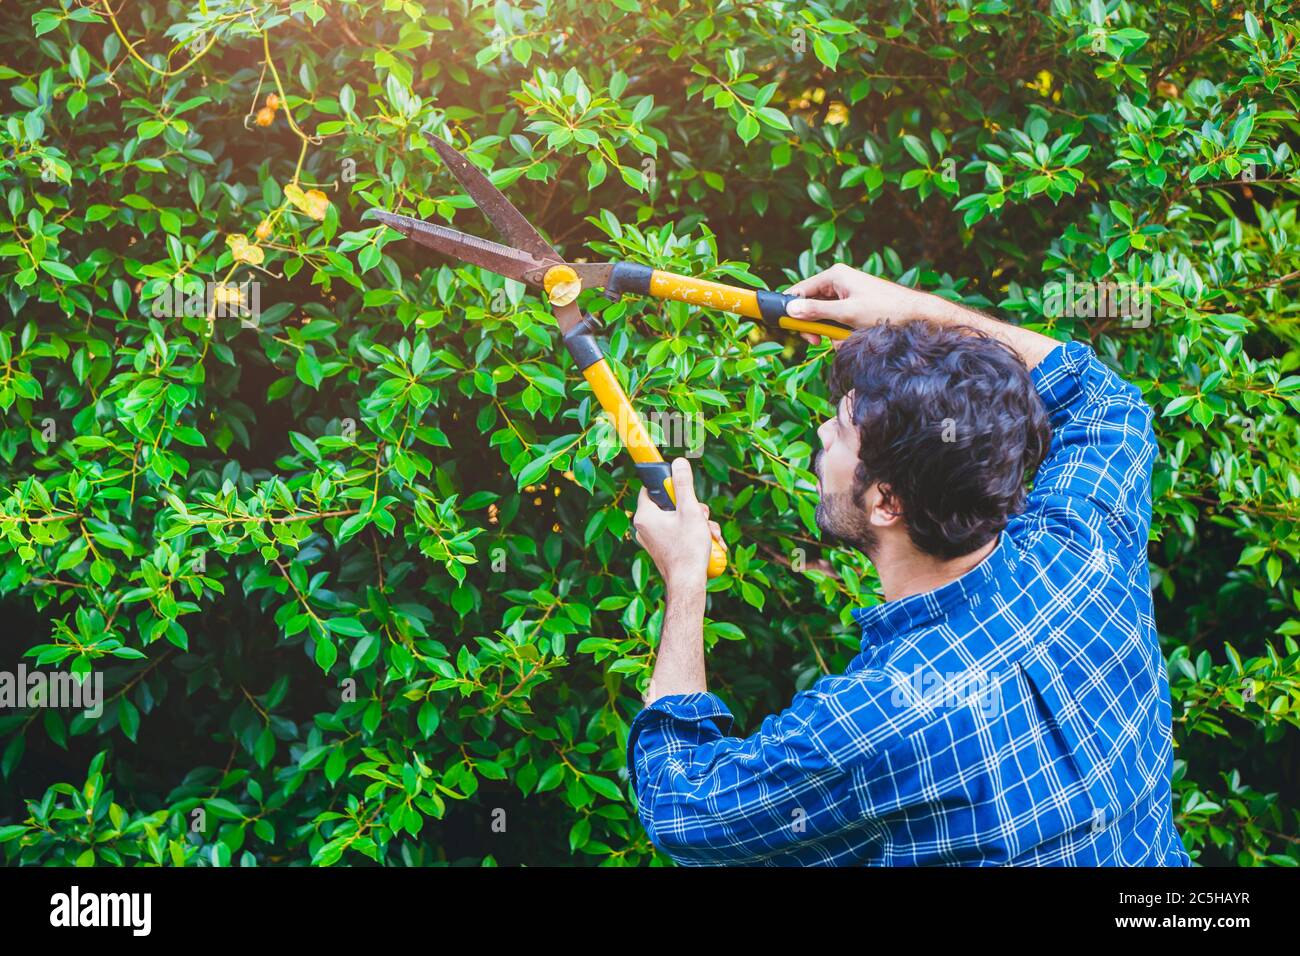 Gardener hedge trimming or rip bush with grass shears gardening scissors activity working during stay home at backyard. Stock Photo